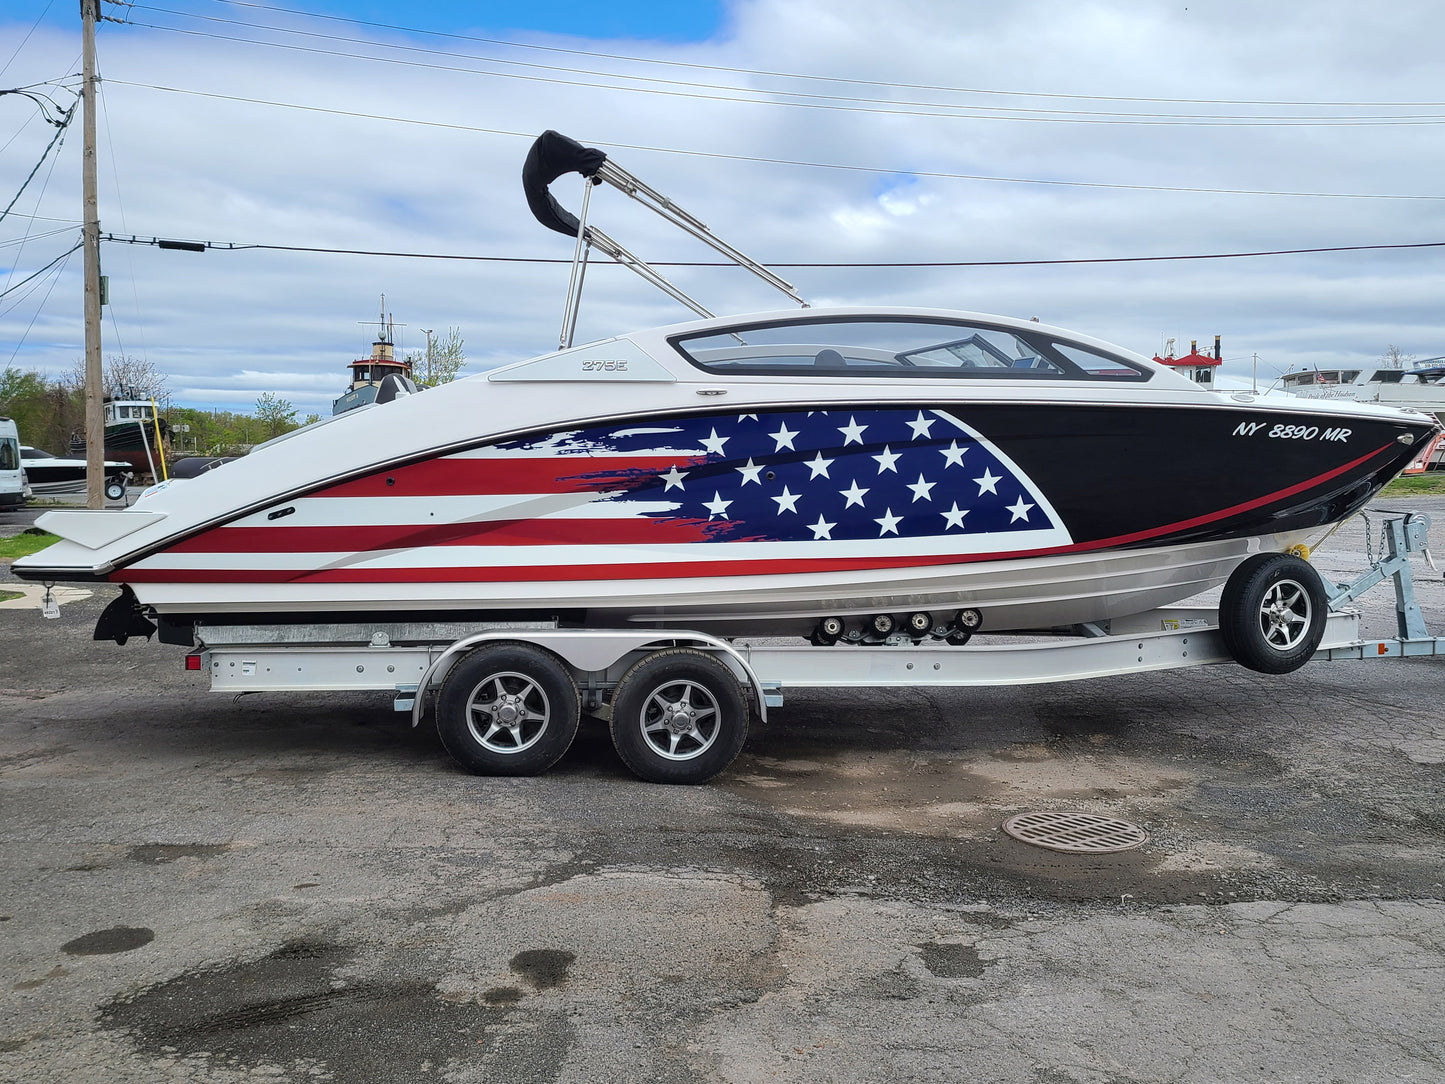 Boat hull wrap installed on power boat. American flag wrap installed on boat.